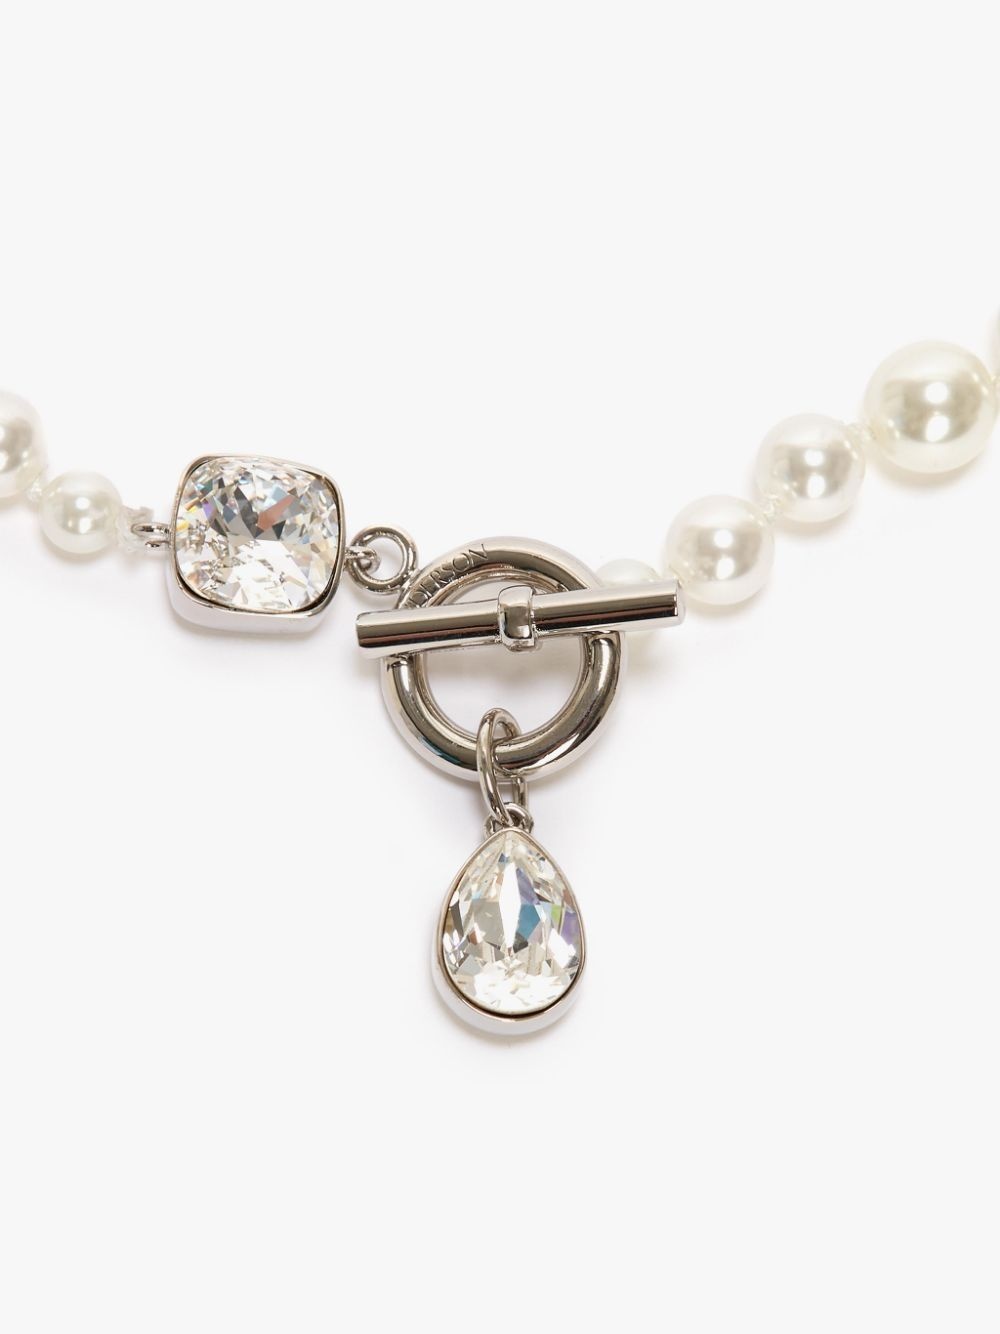 GRADUATED PEARL & CRYSTAL NECKLACE - 3